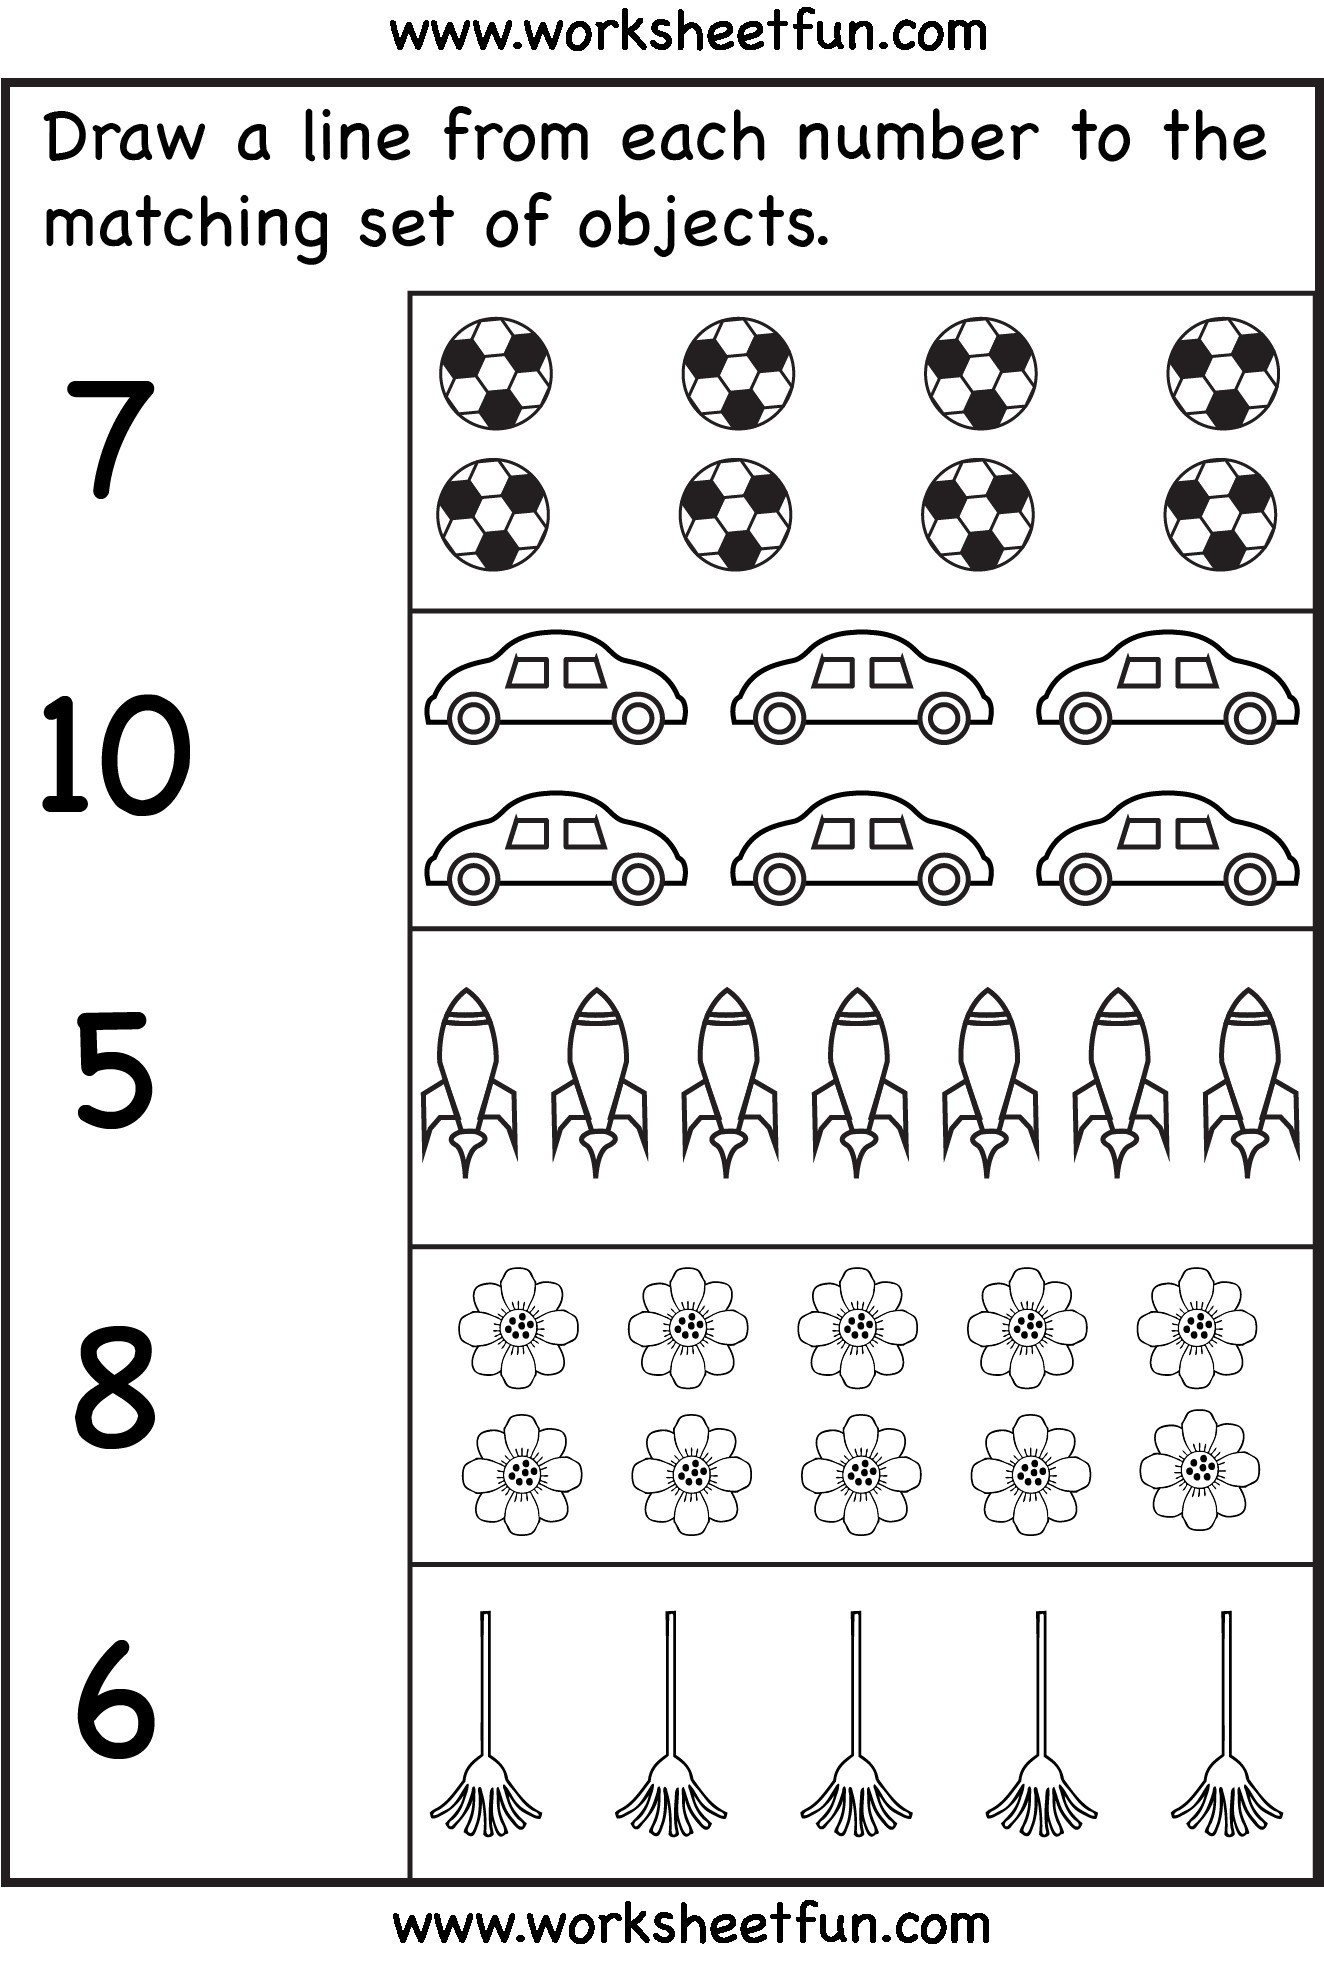 Free Math Worksheets Second Grade 2 Addition Add 2 Digit Plus 1 Digit Missing Addend No Regrouping